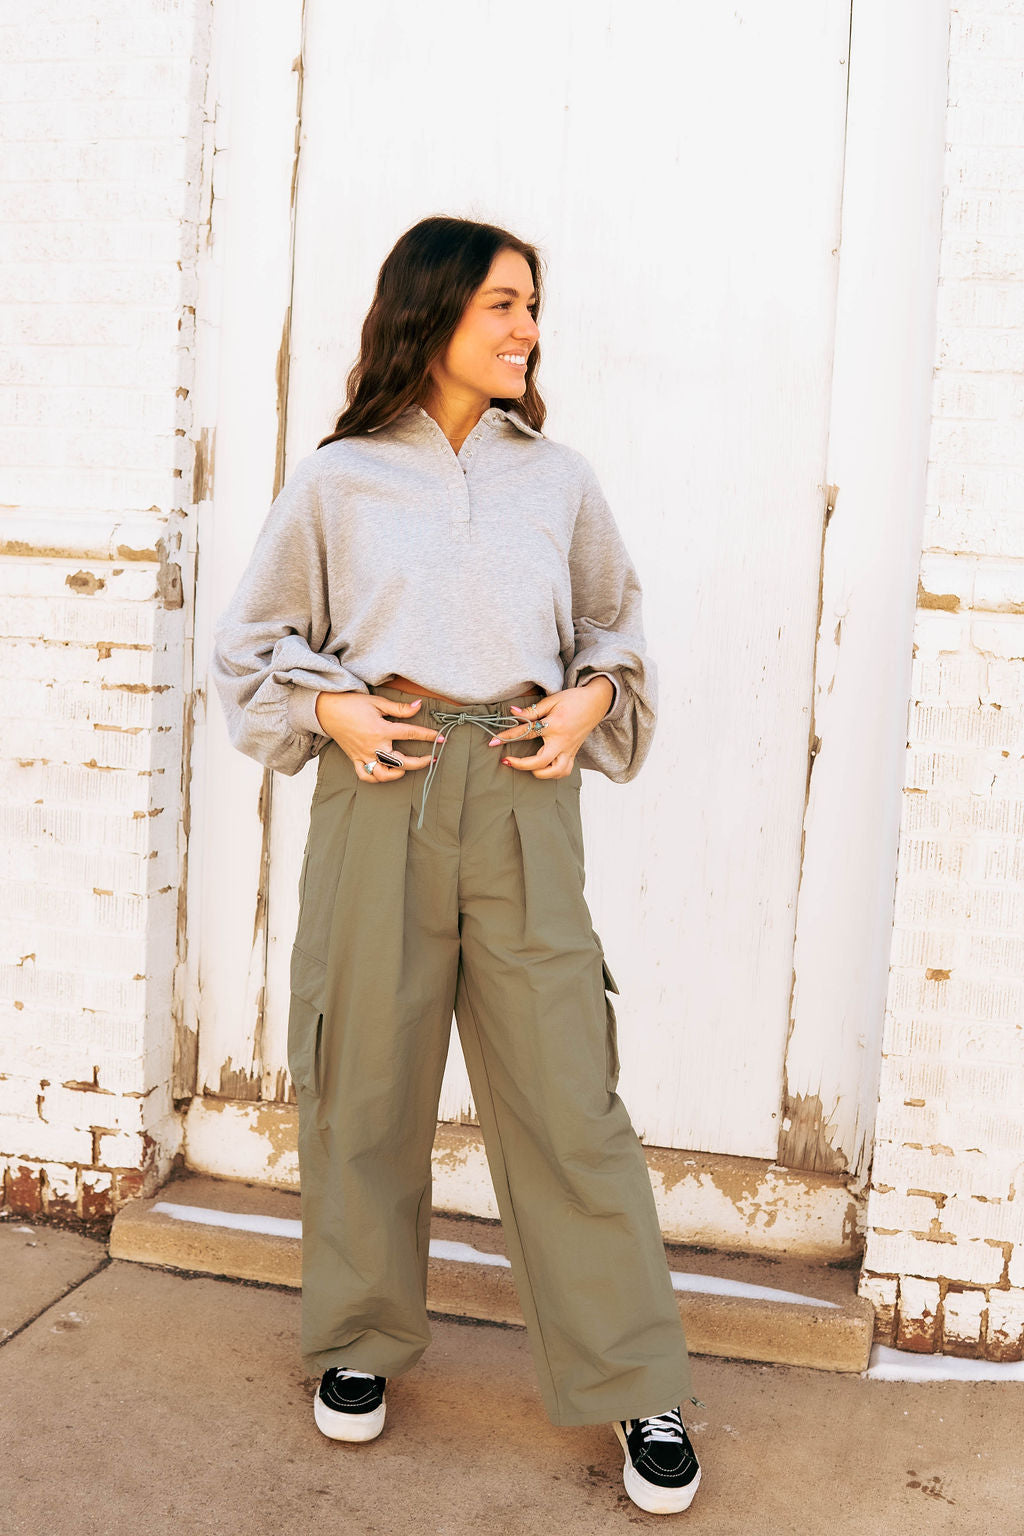 These pants are super comfortable and durable. They look very trendy and can go anywhere! The light olive color makes them versatile and so much fun!